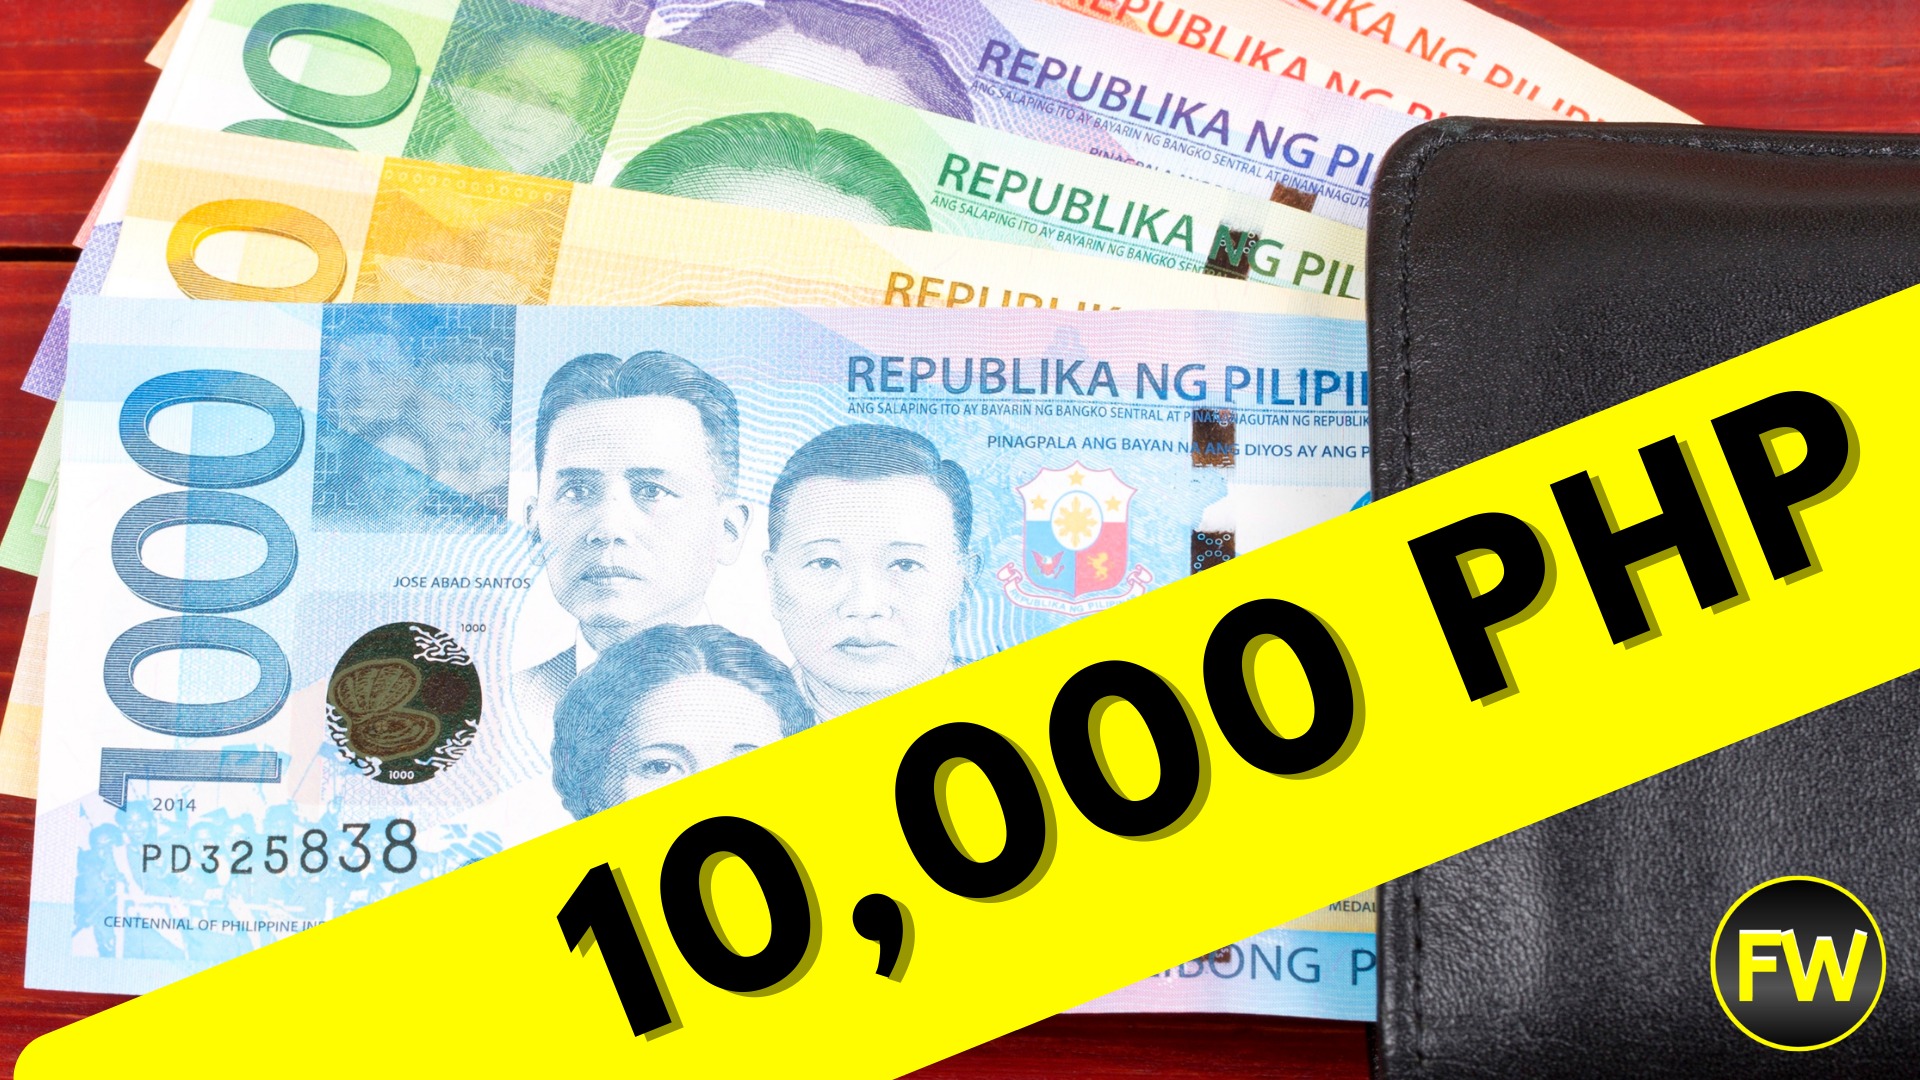 What Business To Start With 10k In The Philippines The Best 7